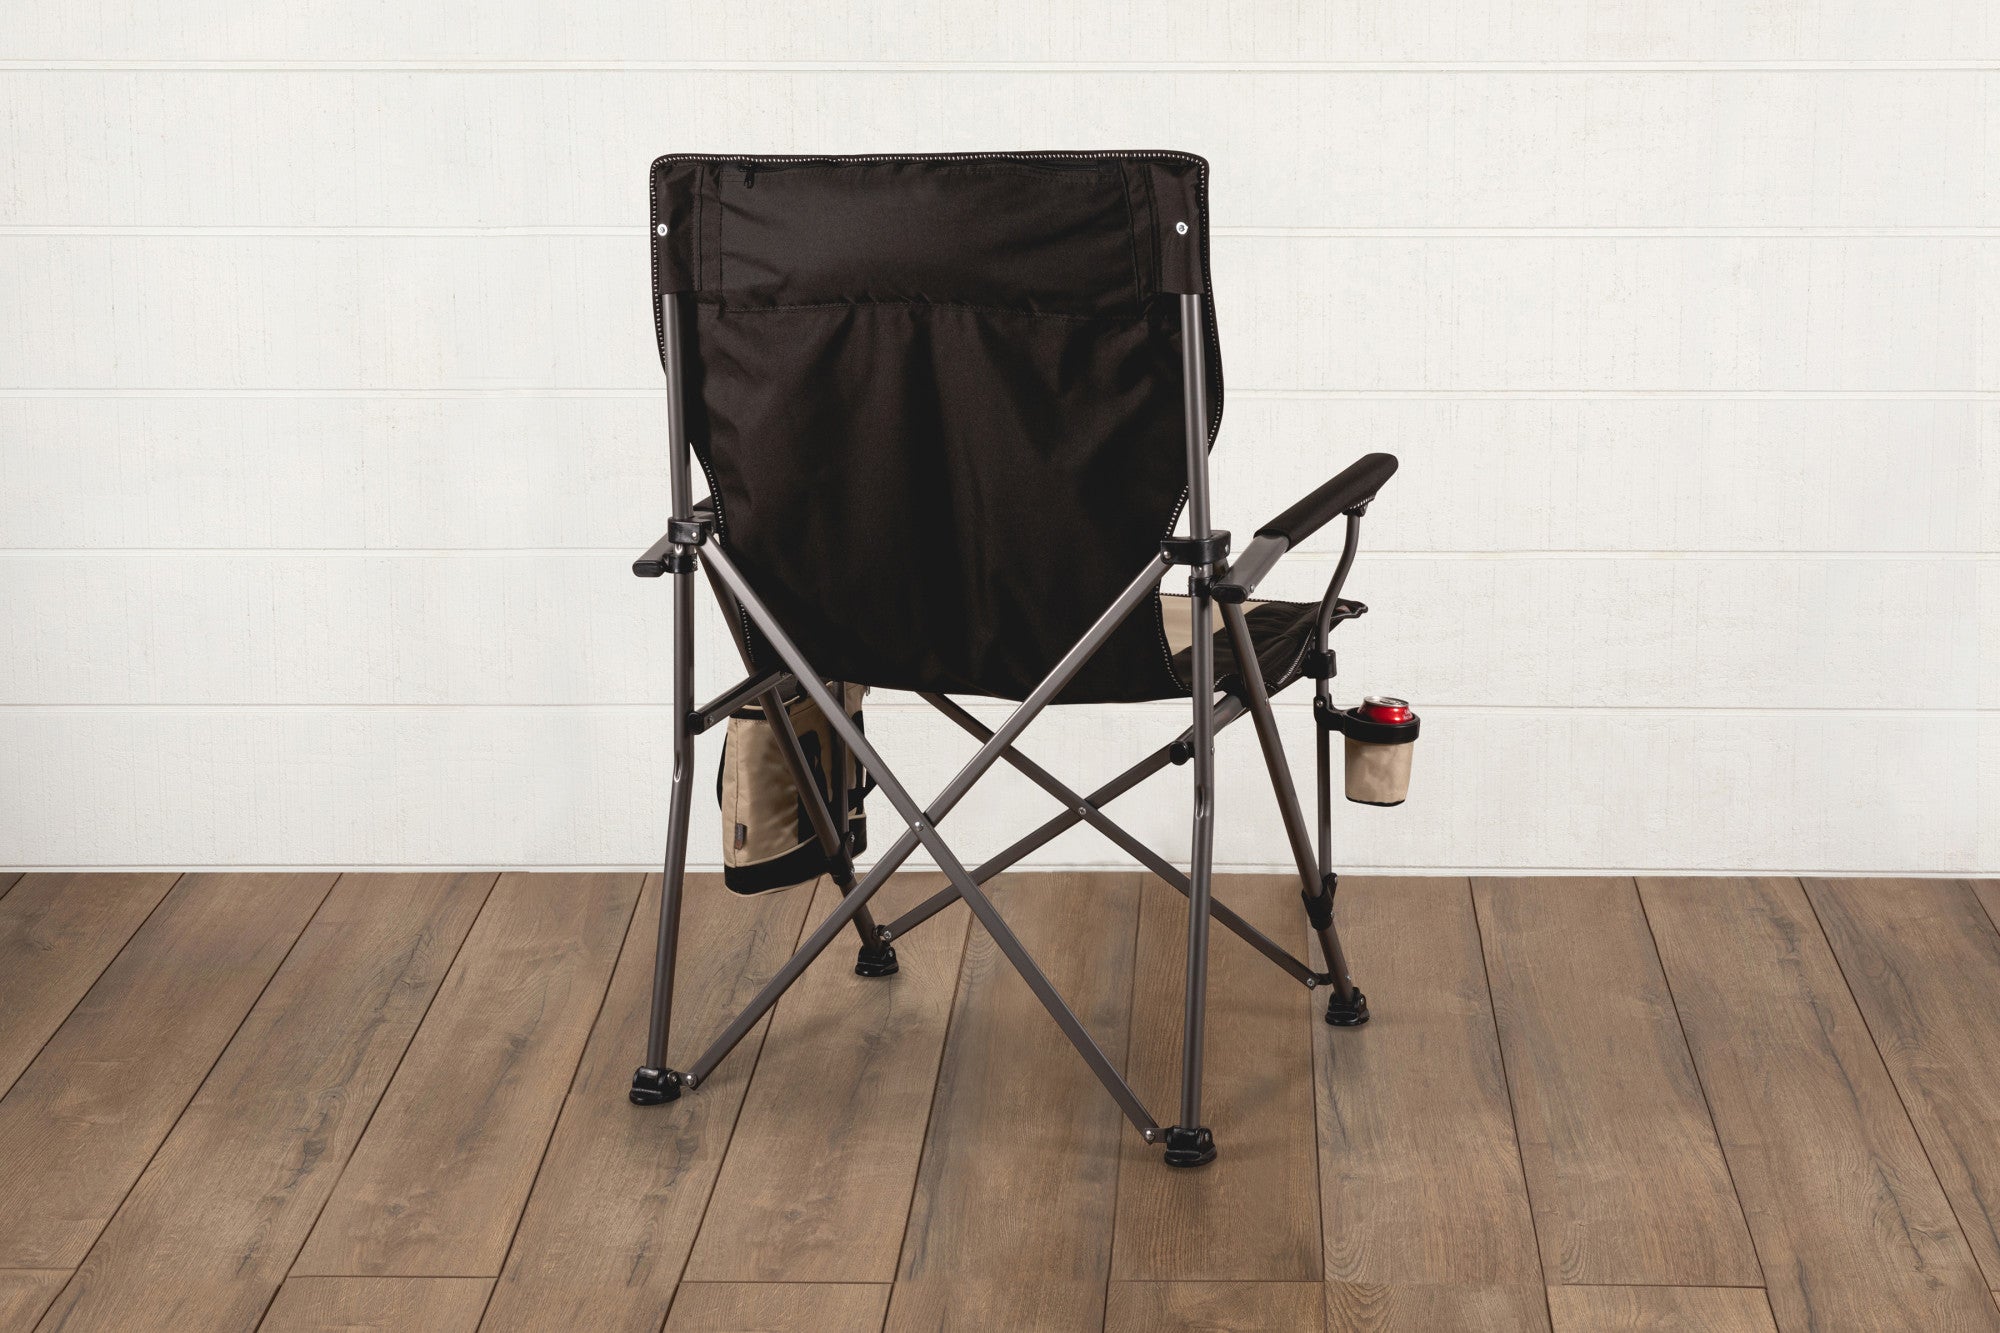 Los Angeles Chargers - Big Bear XXL Camping Chair with Cooler